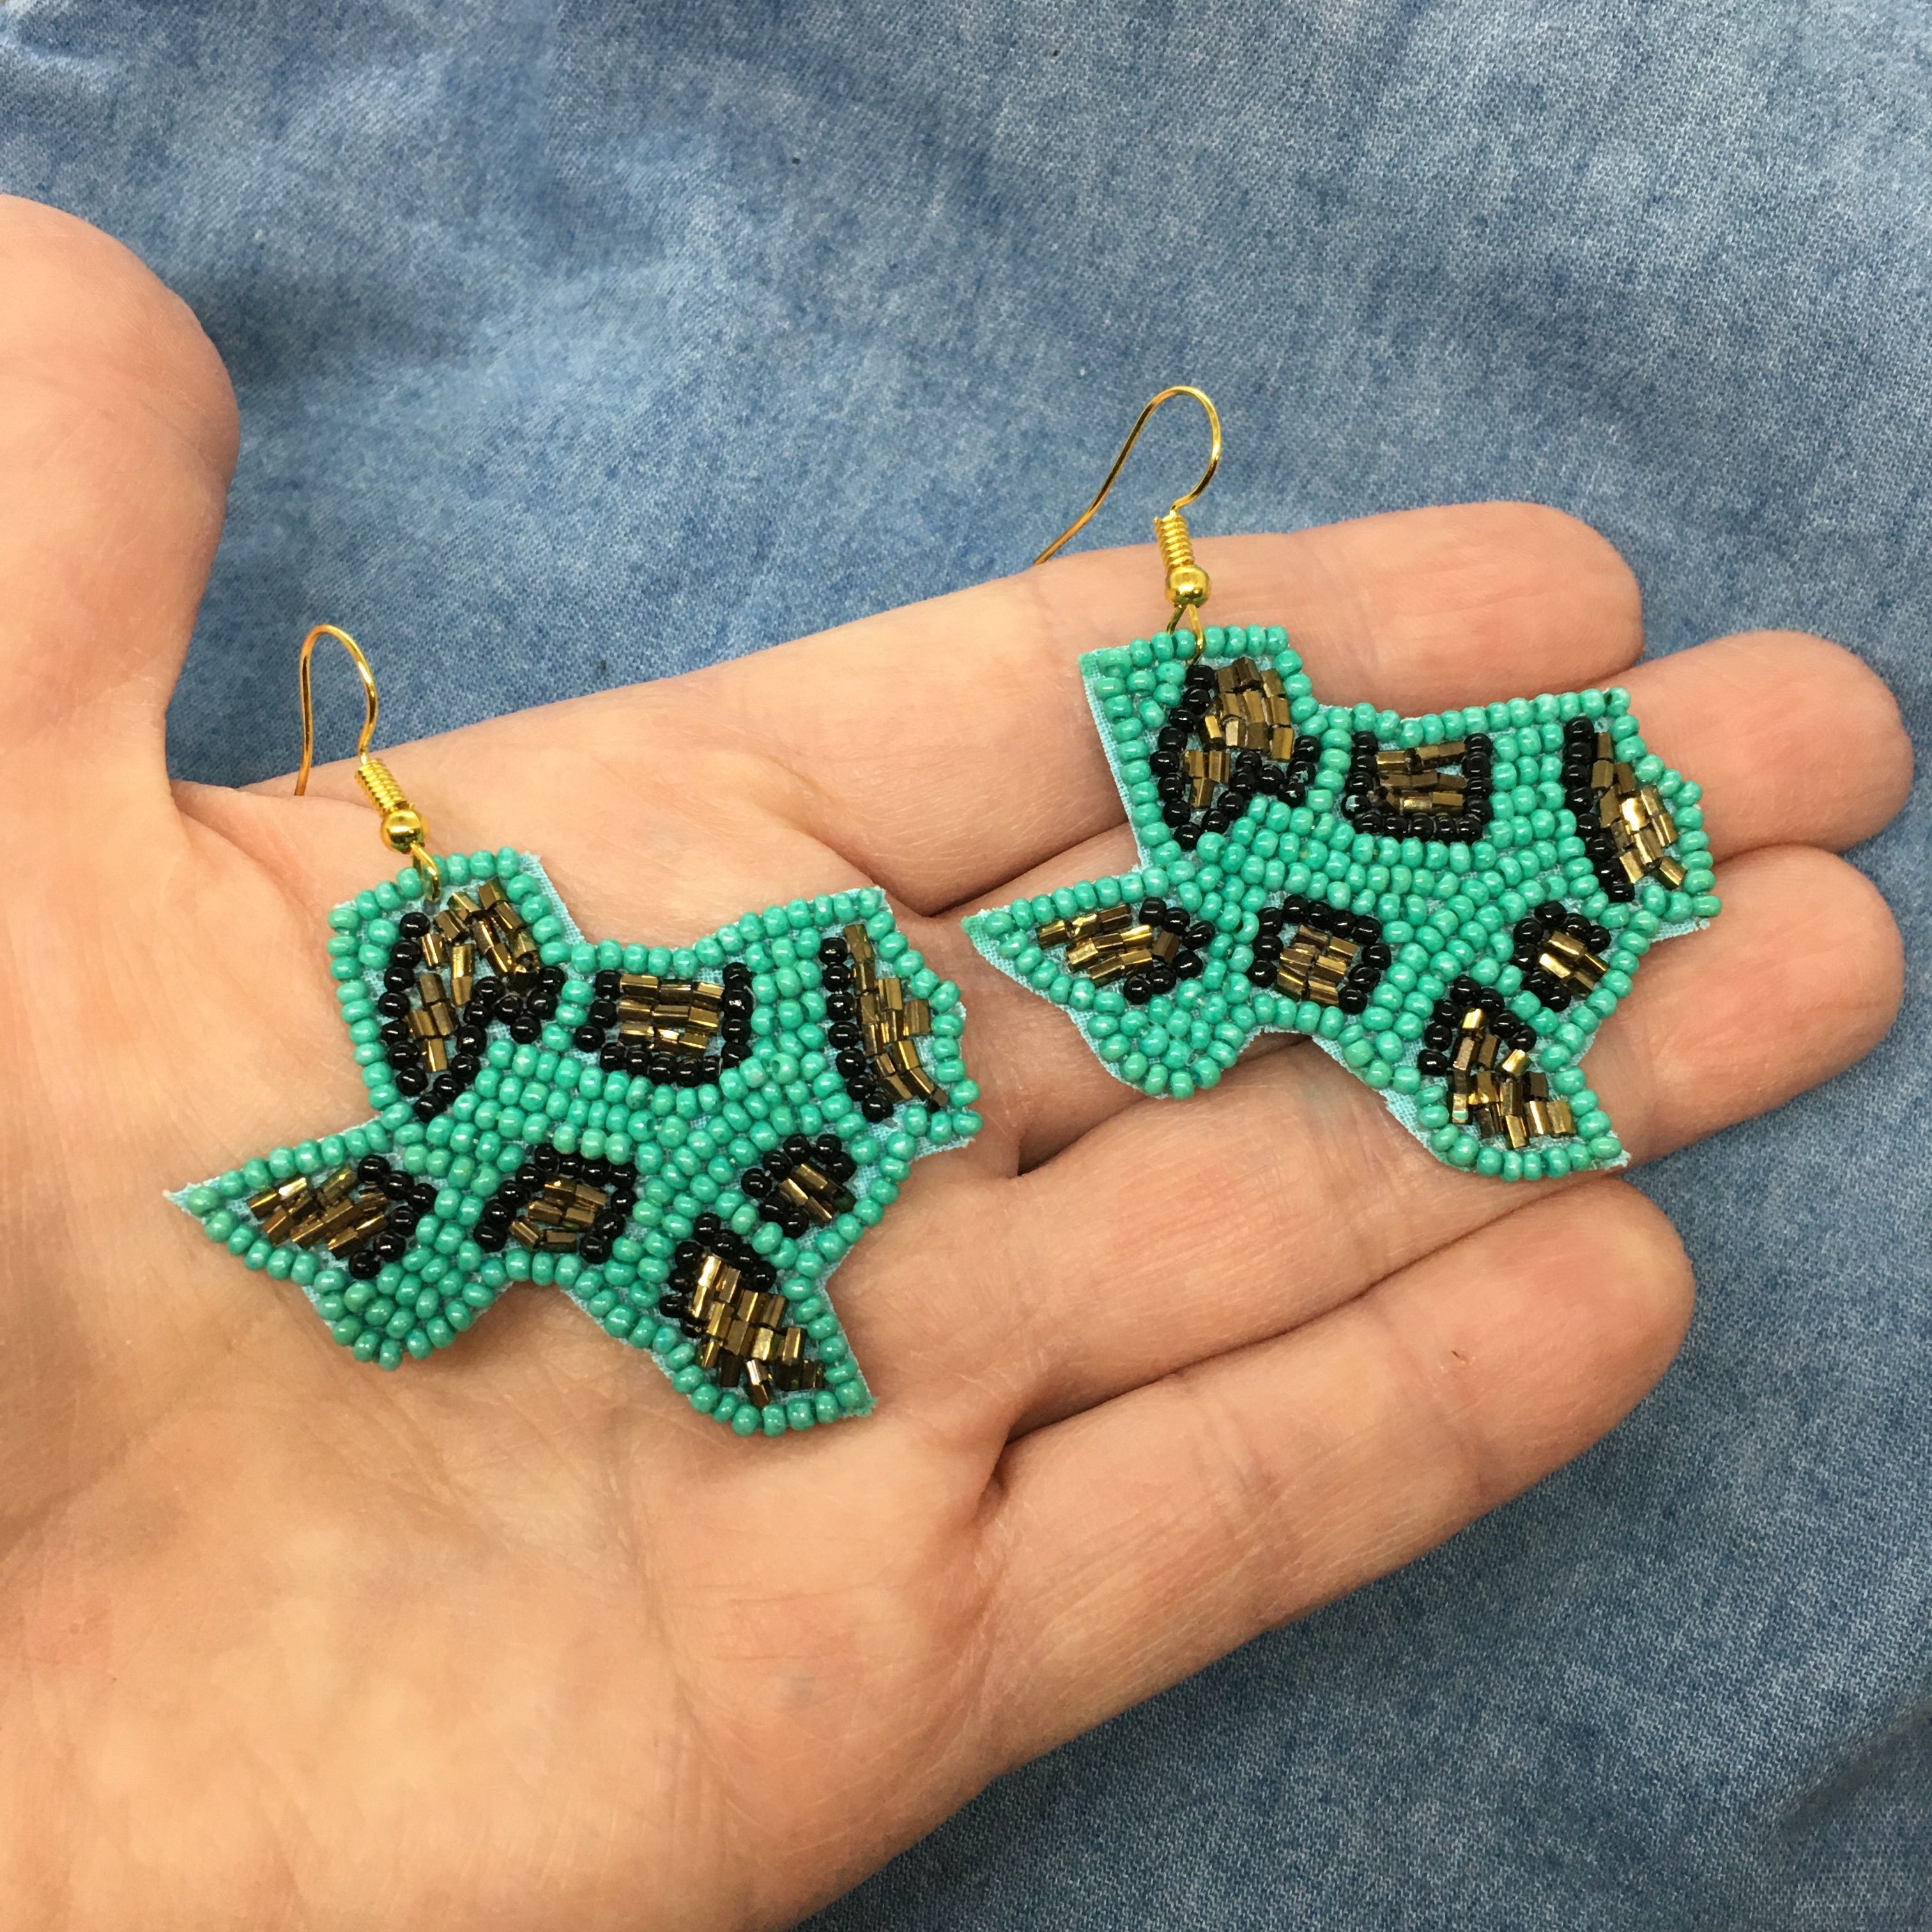 "Texas Strong" Seed Bead Animal Print Statement Earrings--Turquoise, Handcrafted